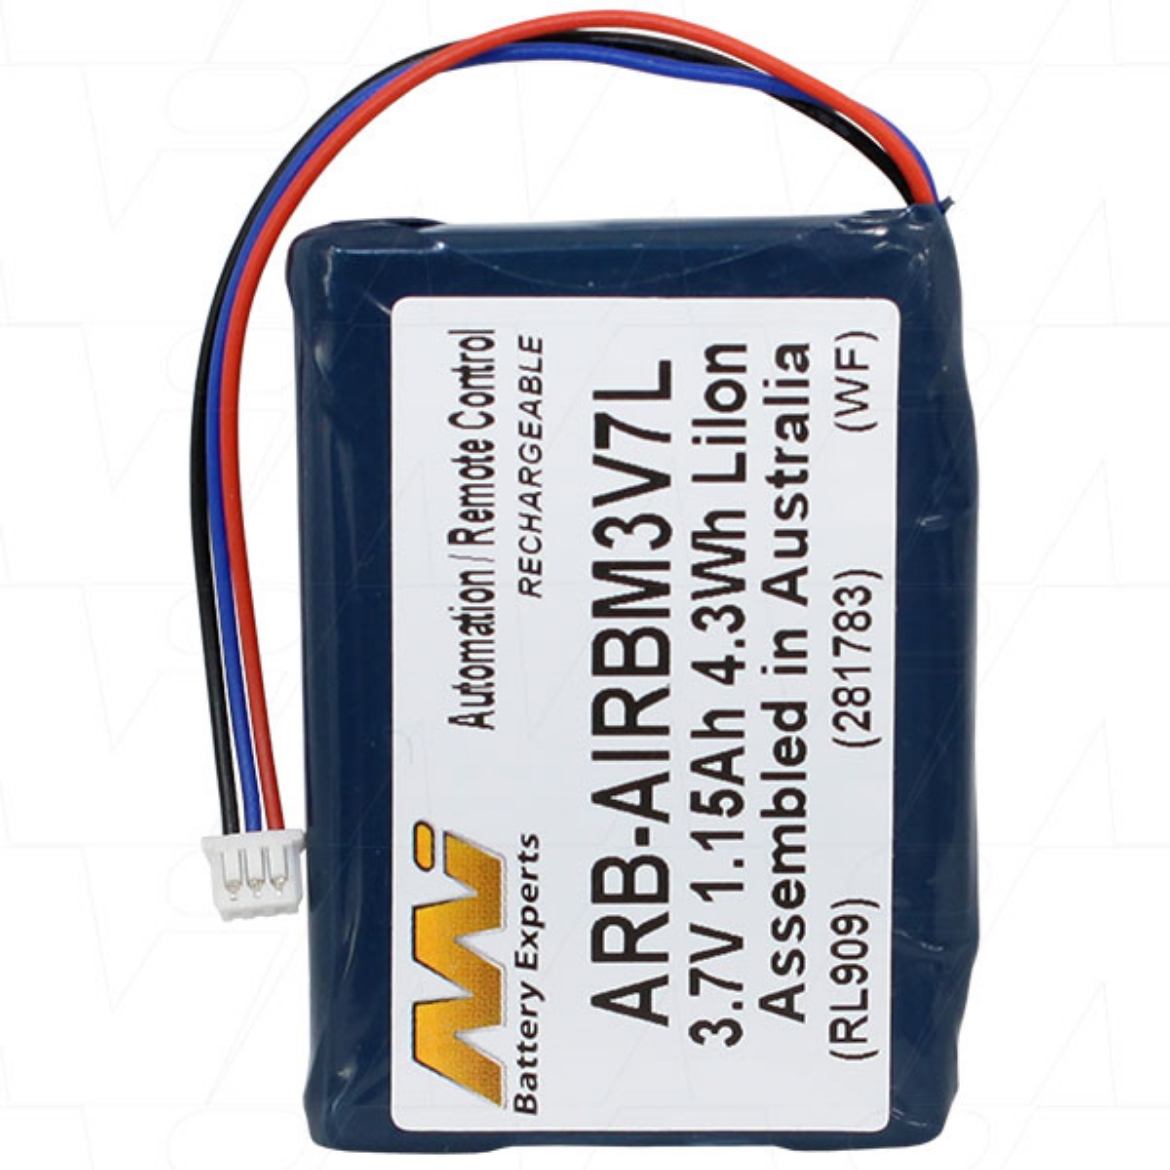 Picture of ARB-AIRBM3V7L AUTEC CRANE REMOTE BATTERY 3.7V 1.15AH 4.3Wh LITHIUM ION